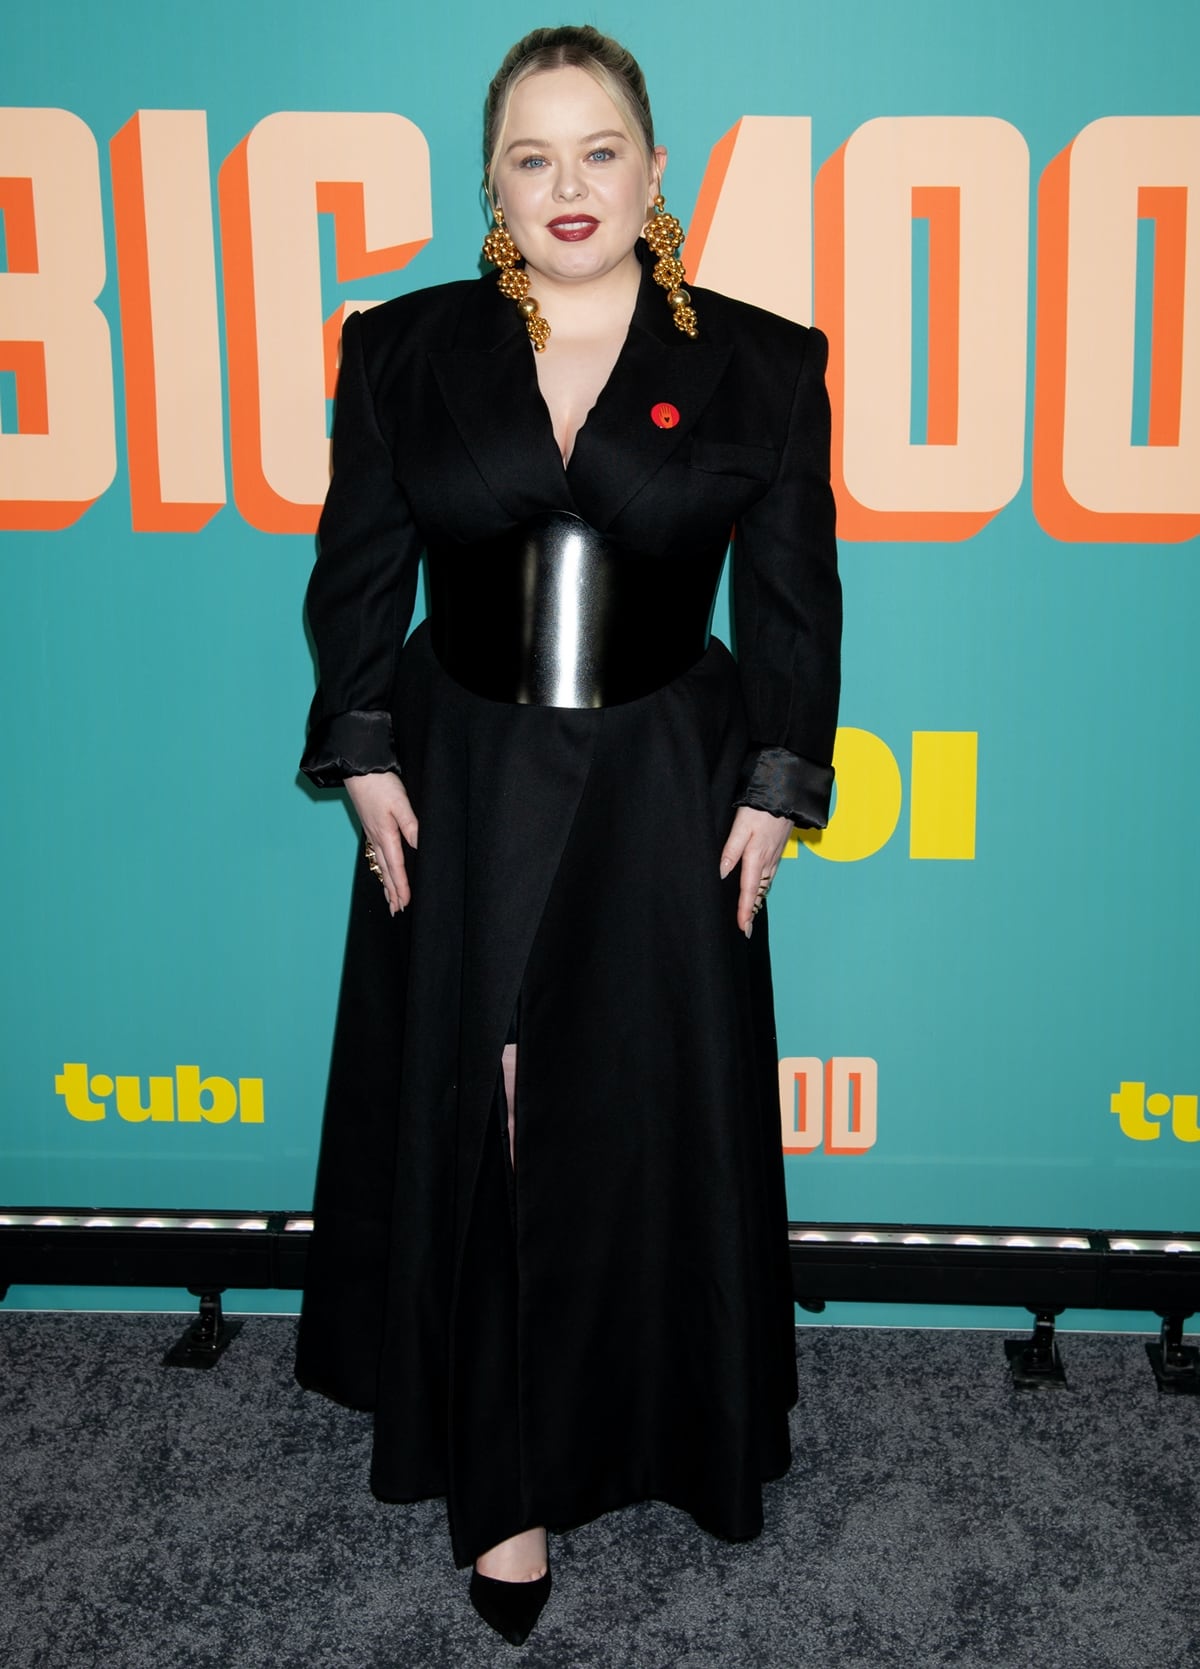 Nicola Coughlan strikes a balance between edgy and elegant in a belted black coat with bold shoulder pads at the Big Mood premiere in NYC